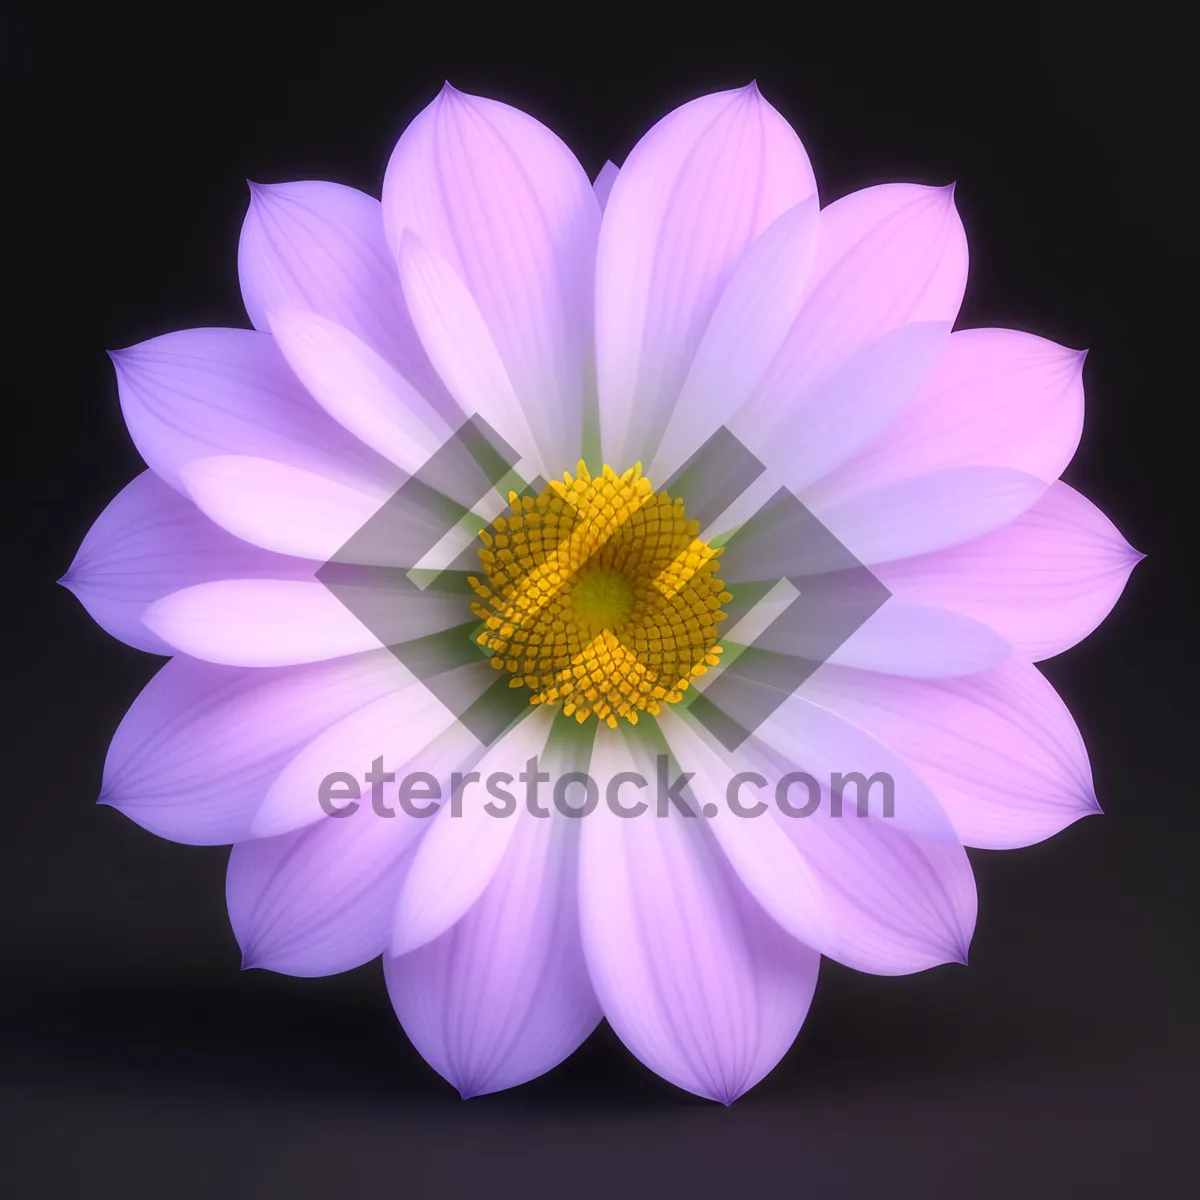 Picture of Pink Daisy Blossom in Full Bloom